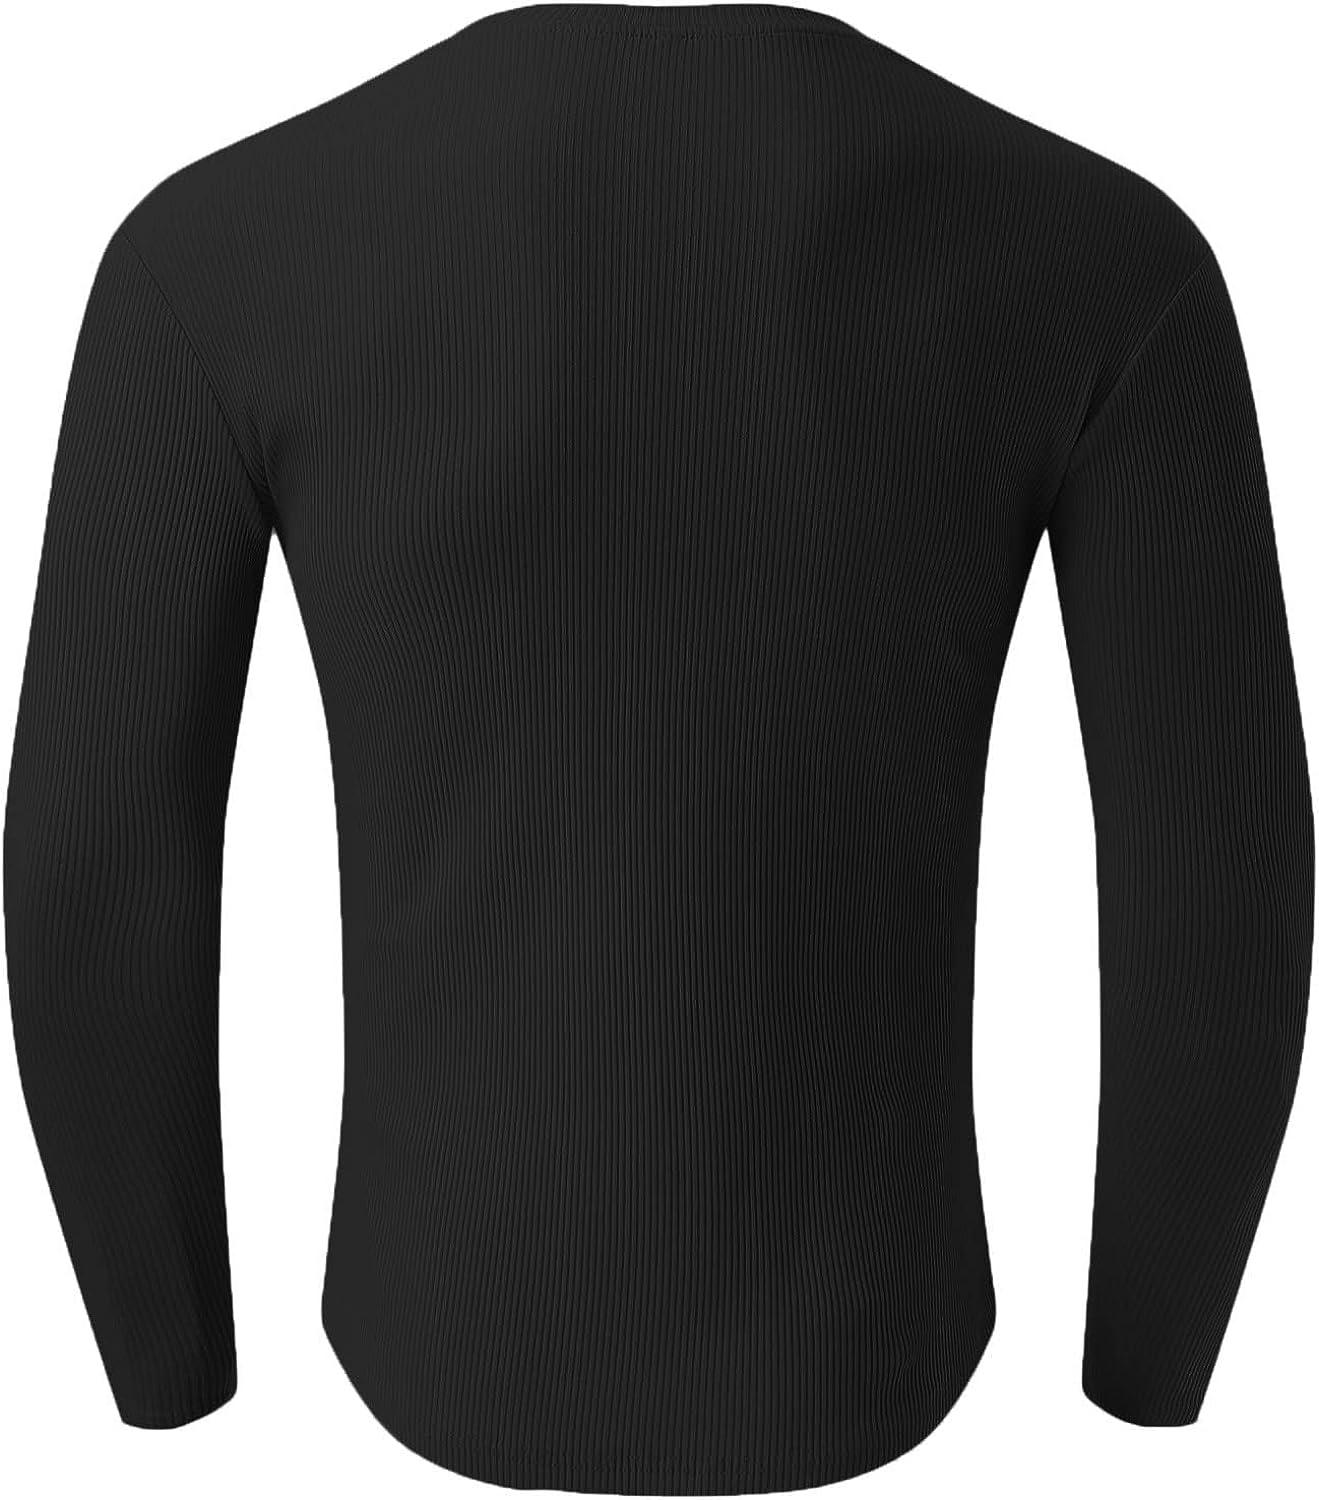 Men's Knit Rib Sports T-shirts Muscle Slim Fit Elastic Henley V Neck Tops  Athletic Gym Workout Long Sleeve Tshirt Black 3X-Large